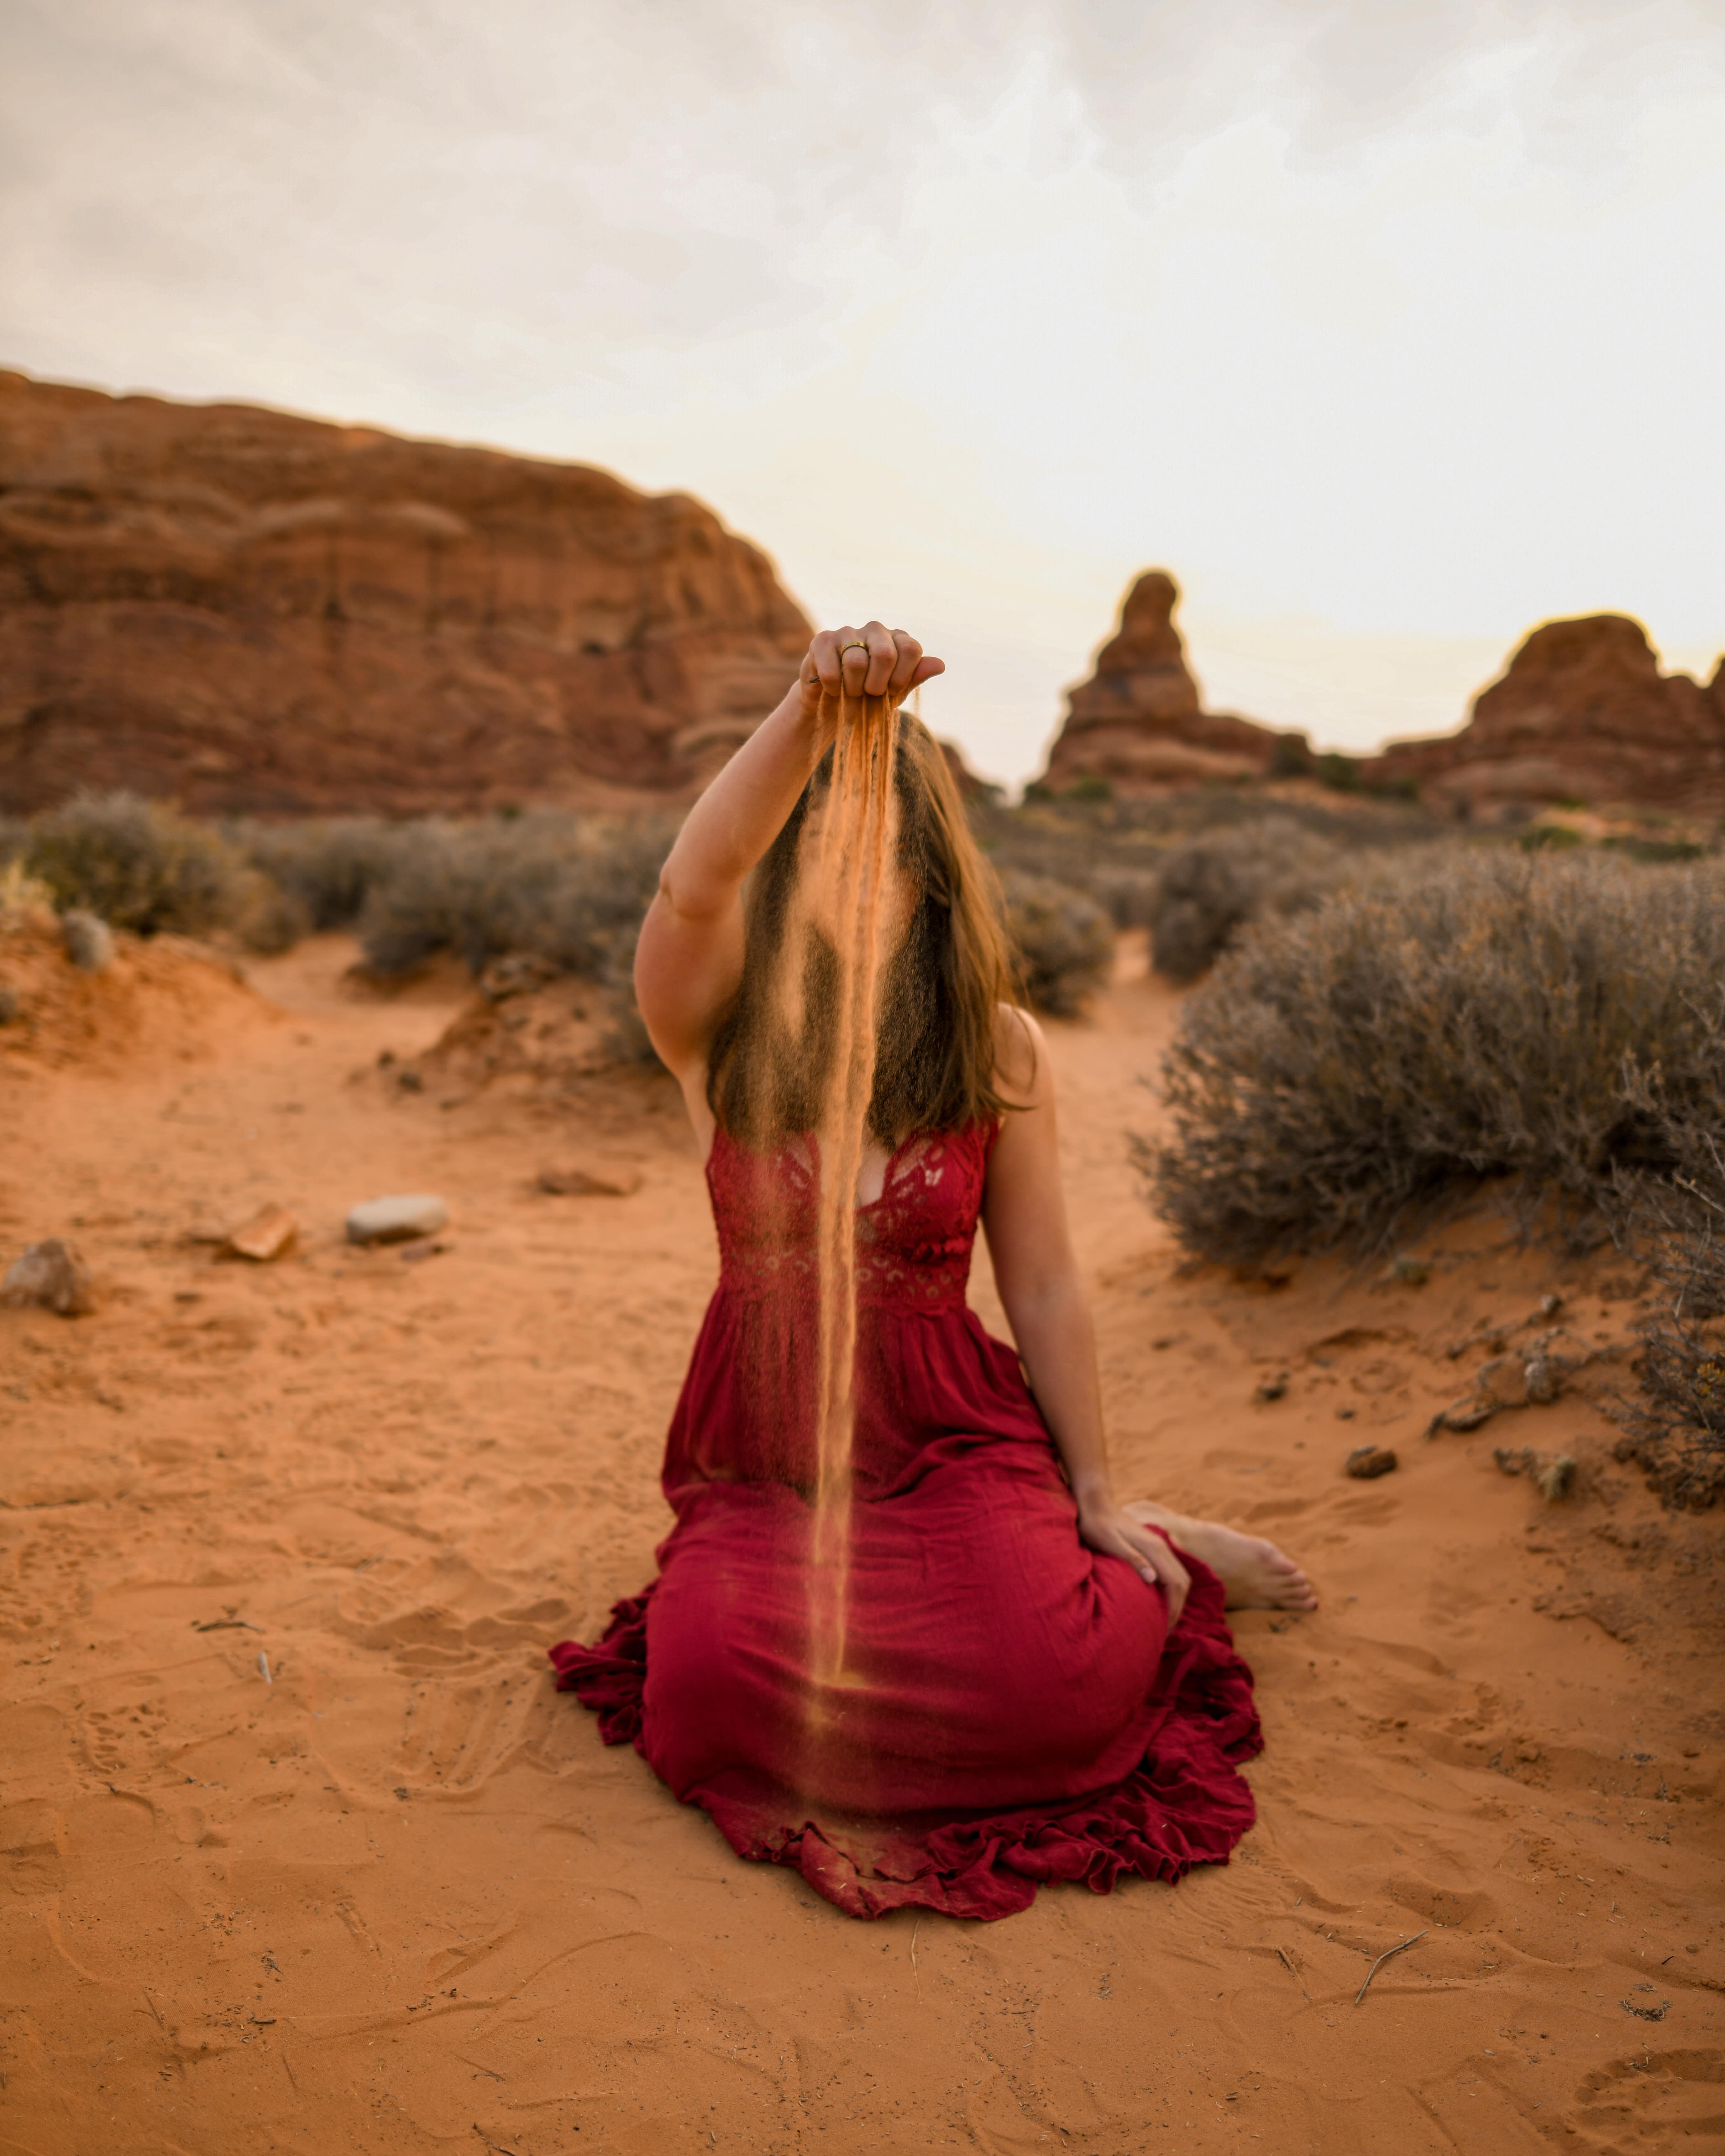 Girl in red dress sitting in sand and sprinkling sand infront of her face